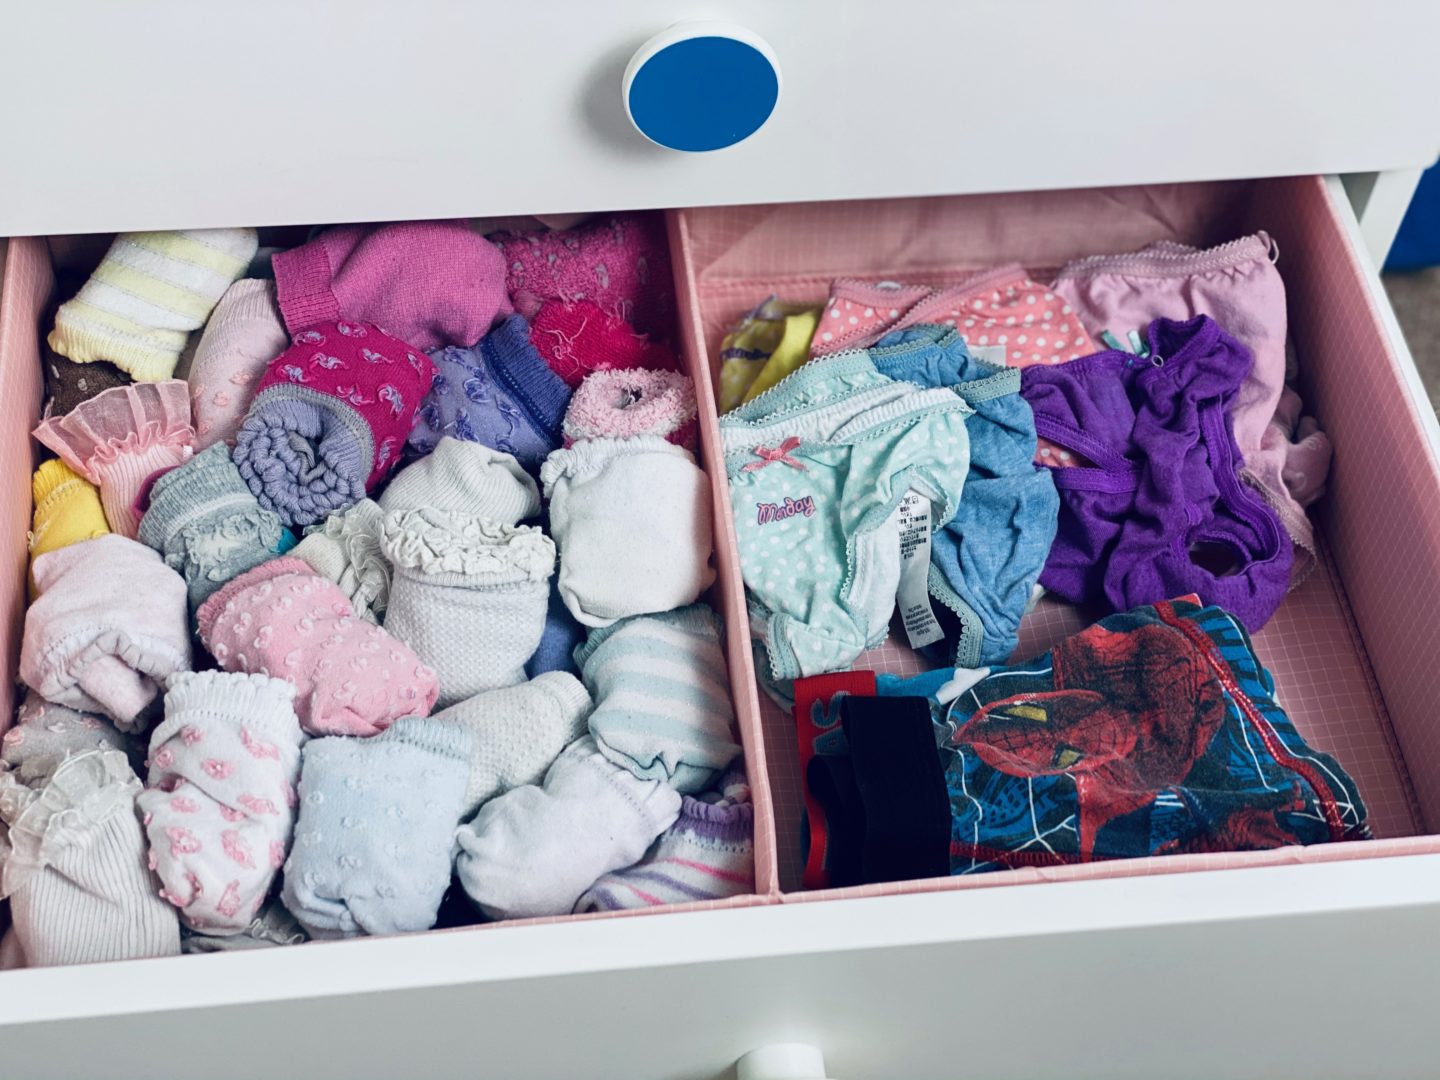 AD: Taking back control of mornings for only £51.75 with IKEA organisation hacks. Kid's drawer post organisation. 